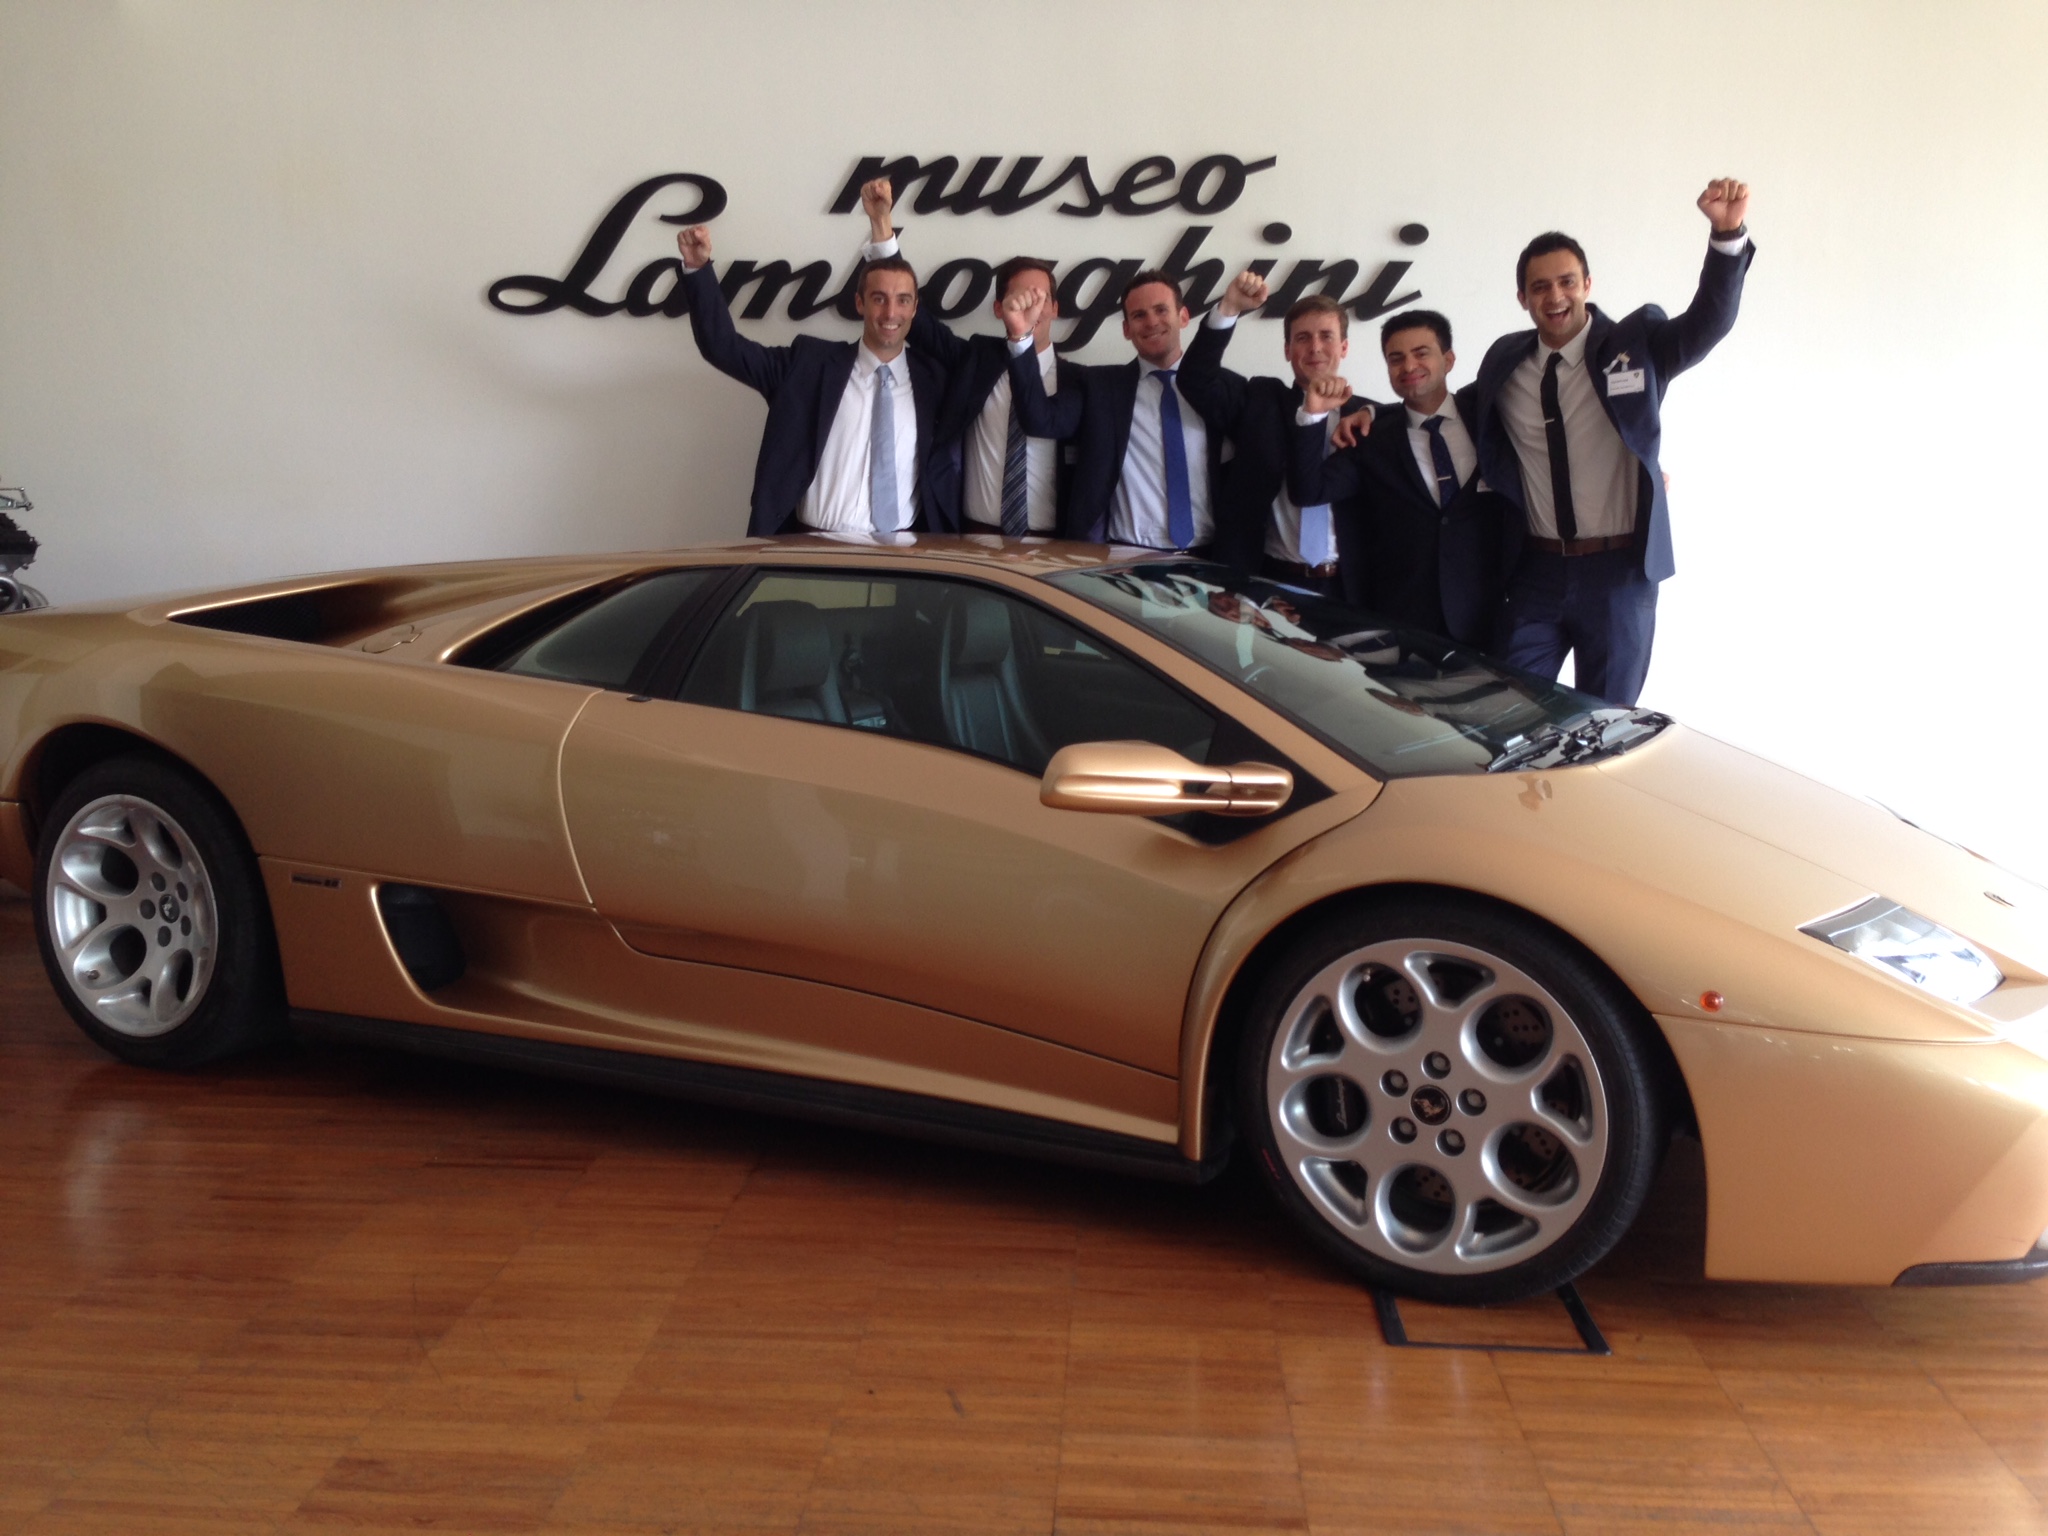 Lamborghini and Undergraduate students behind it with arms raised